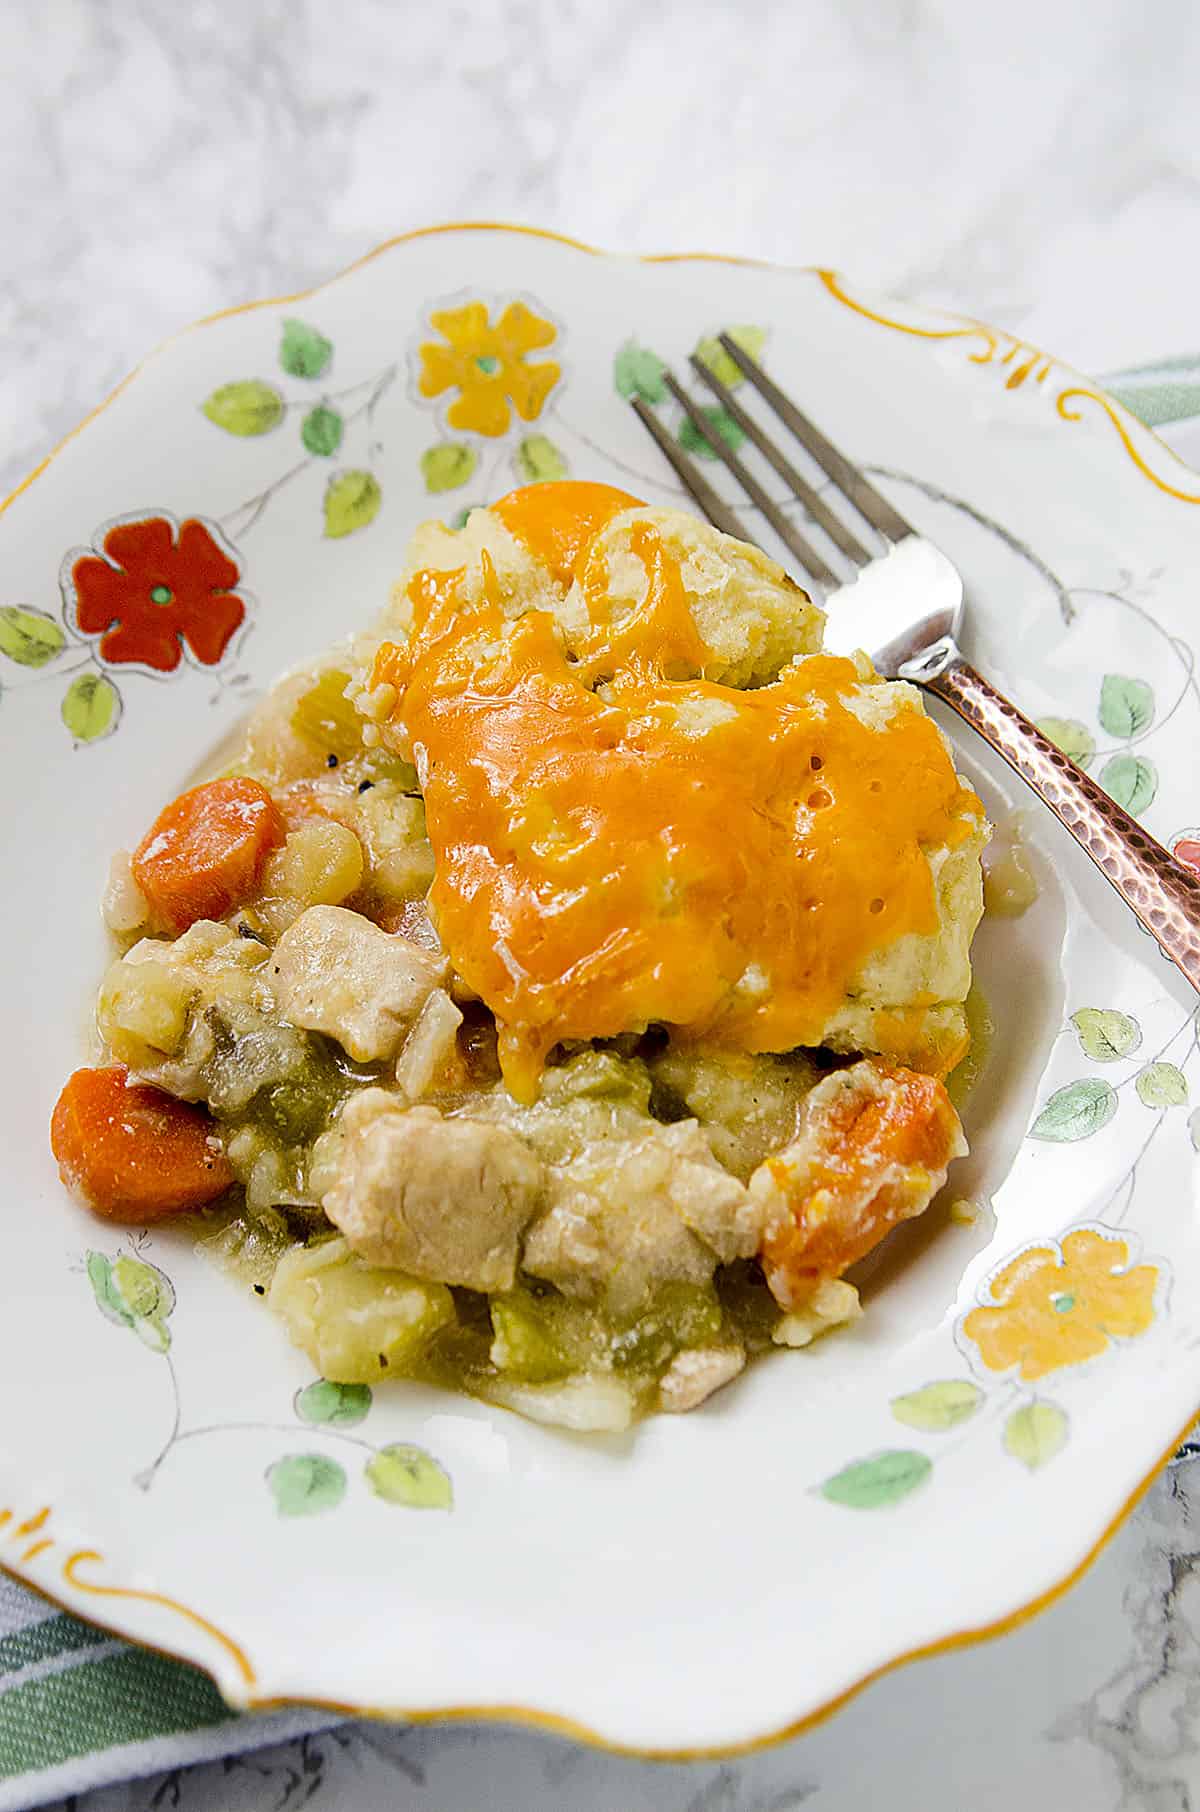 Chicken stew in a flowered plate with a fork on the right hand side.